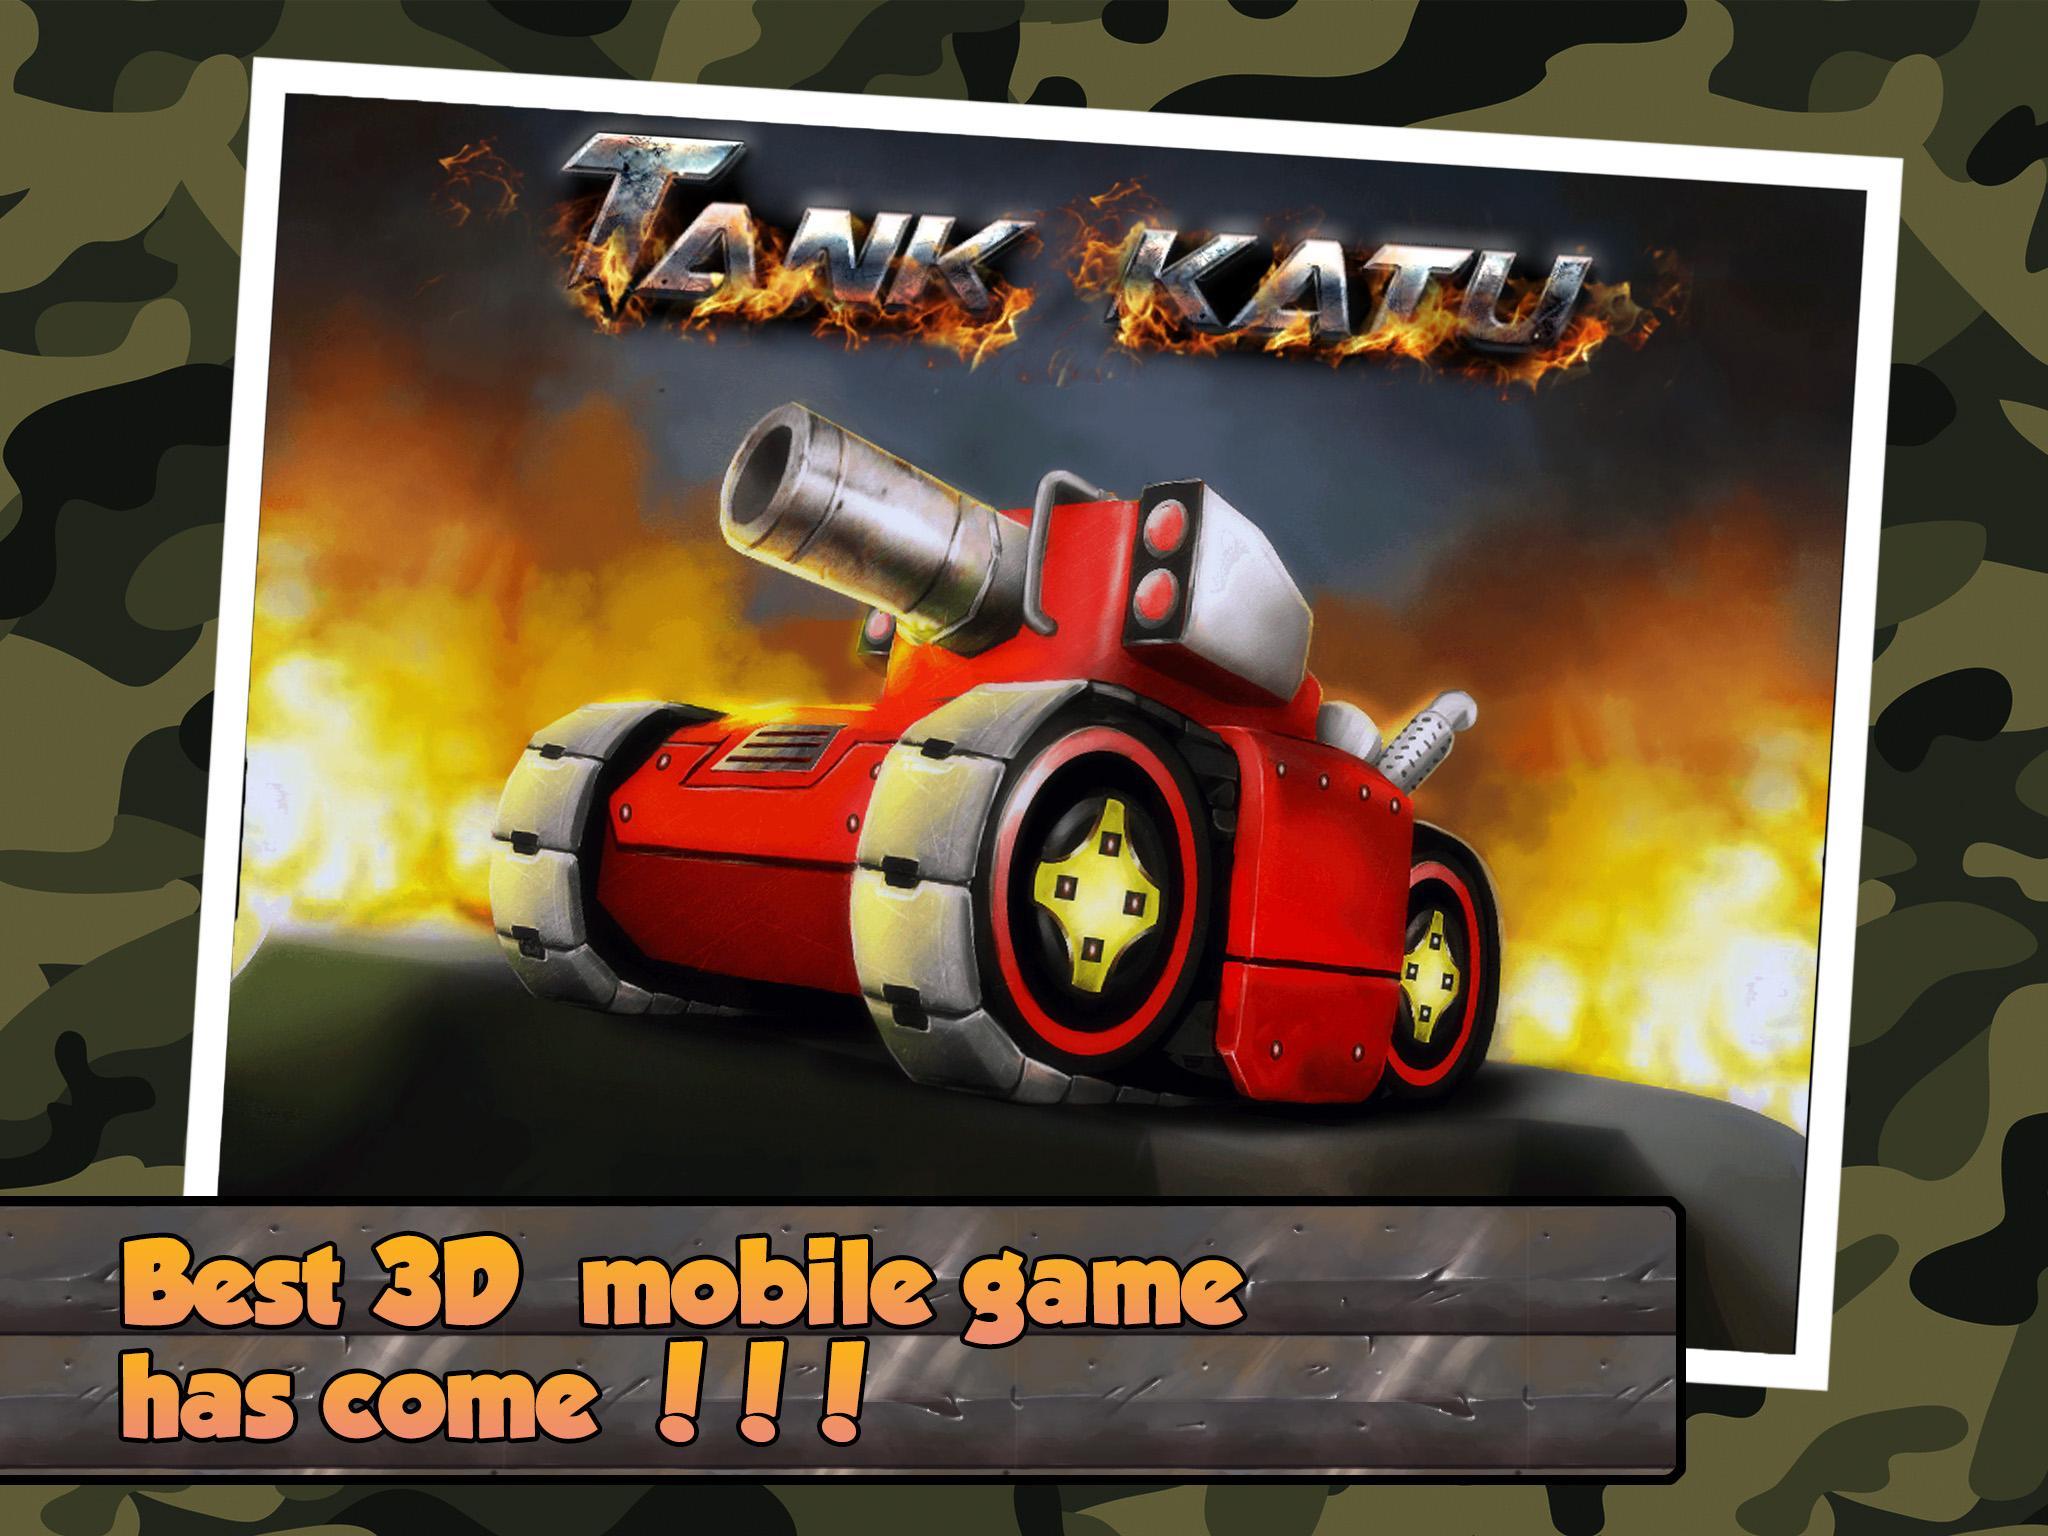 Cars arena cars and guns. Battle Tank Arena. Crash Arena 3d java. Battle crash Android. Battle crash Android Джин.